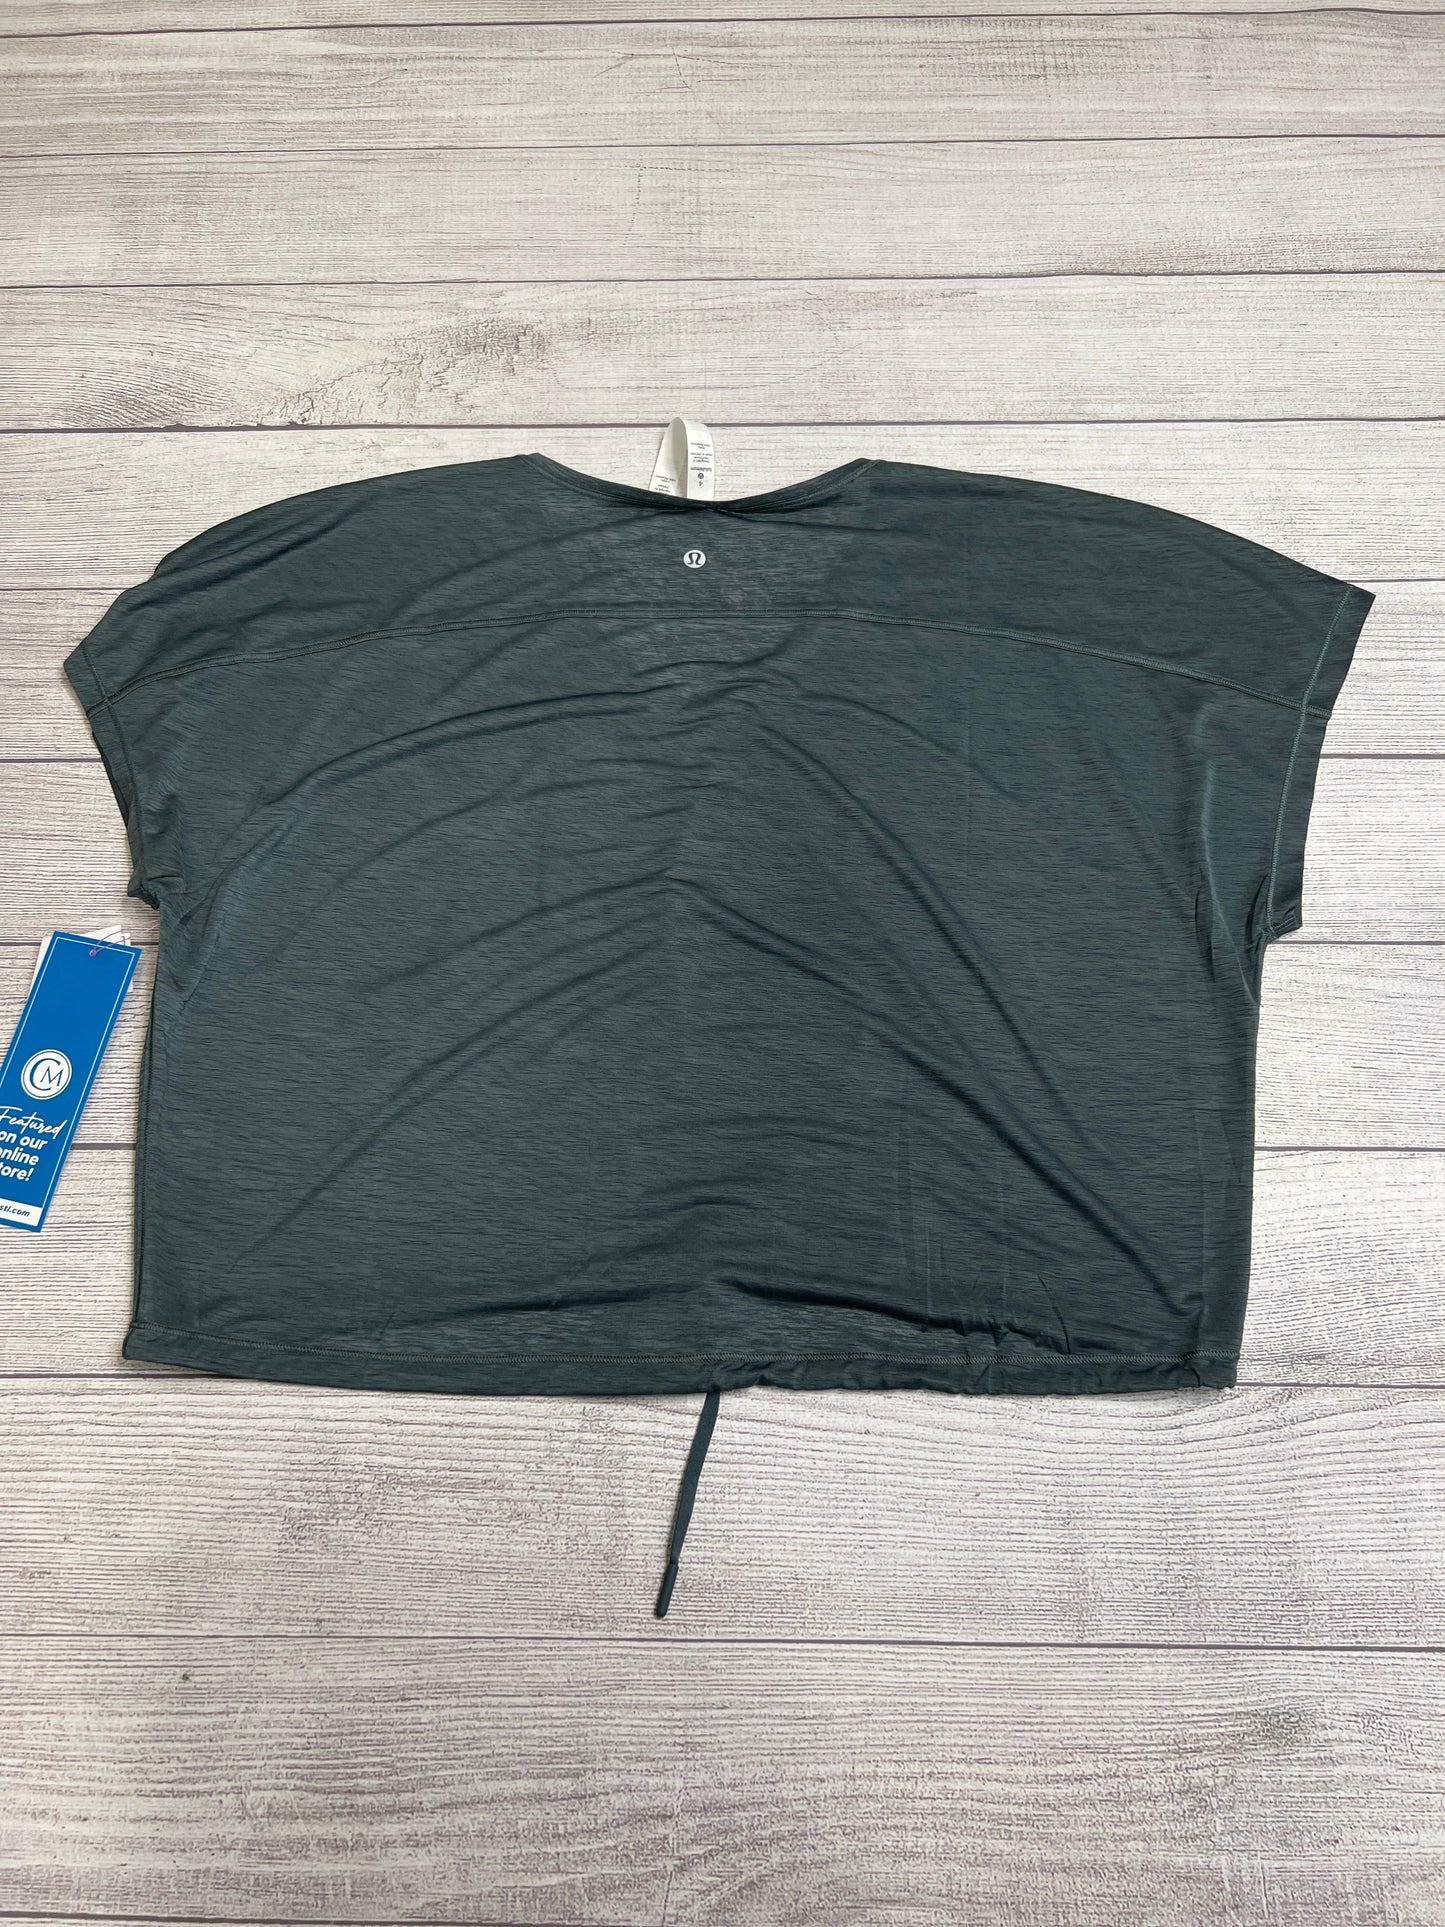 Athletic Top Short Sleeve By Lululemon  Size: S